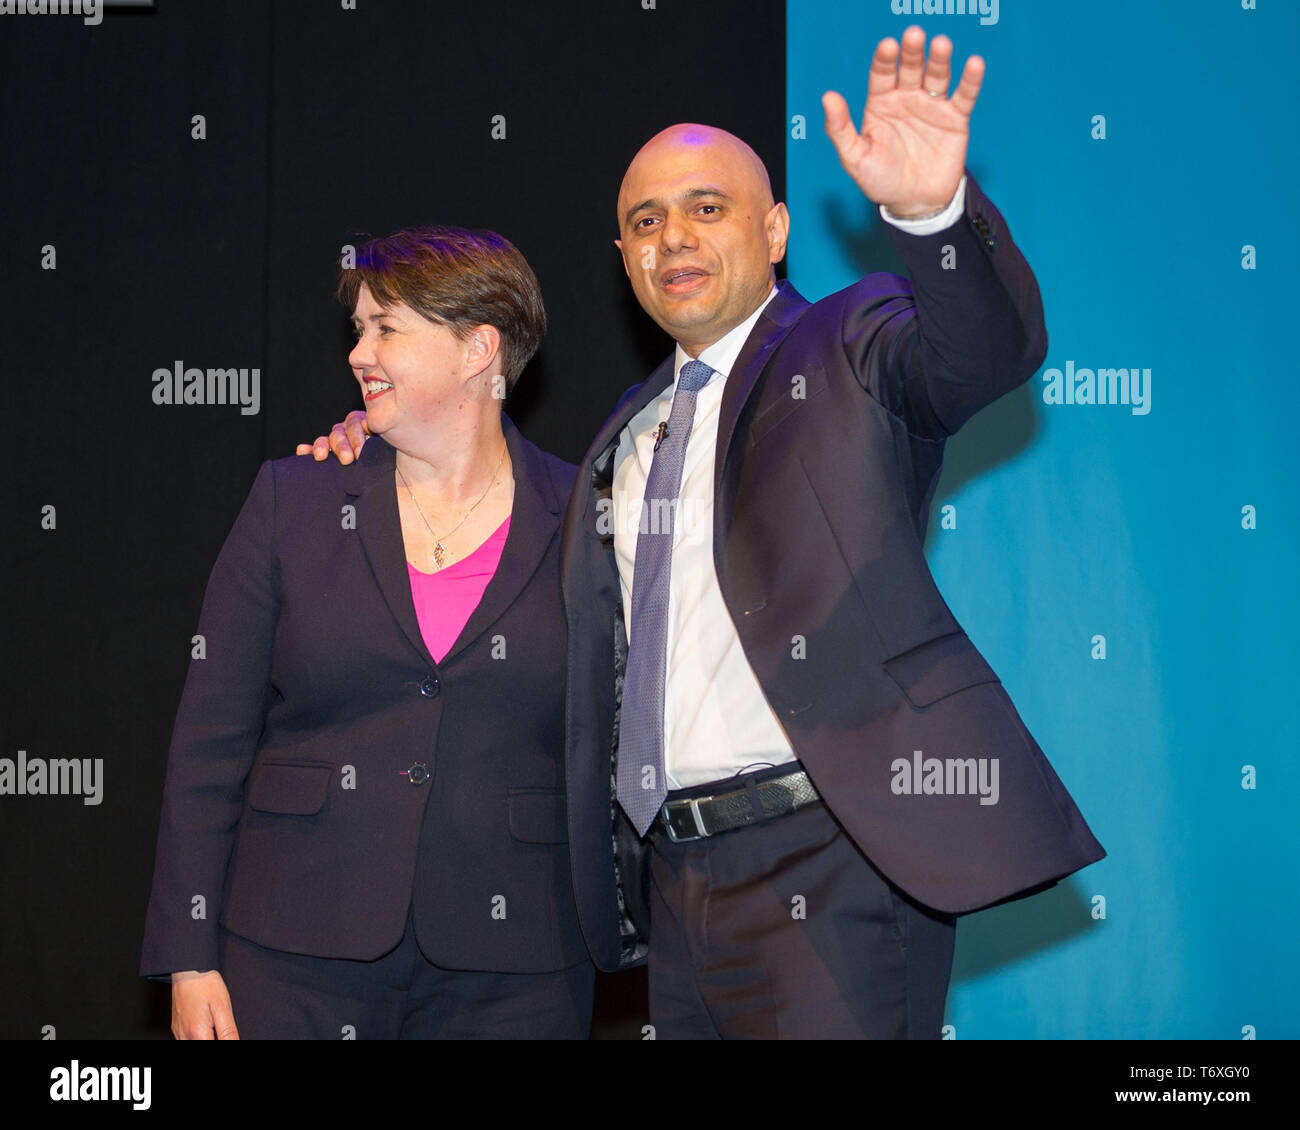 Aberdeen, UK. 3rd May, 2019. Pictured: (left) Ruth Davidson and (right) Sajid Javid Home Secretary, Sajid Javid delivers a keynote speech address to conference. Pictured: Jackson Carlow, deputy leader of the Scottish Conservative & Unionist Party, applauds a the home secretary's speech. Credit: Colin Fisher/Alamy Live News Stock Photo